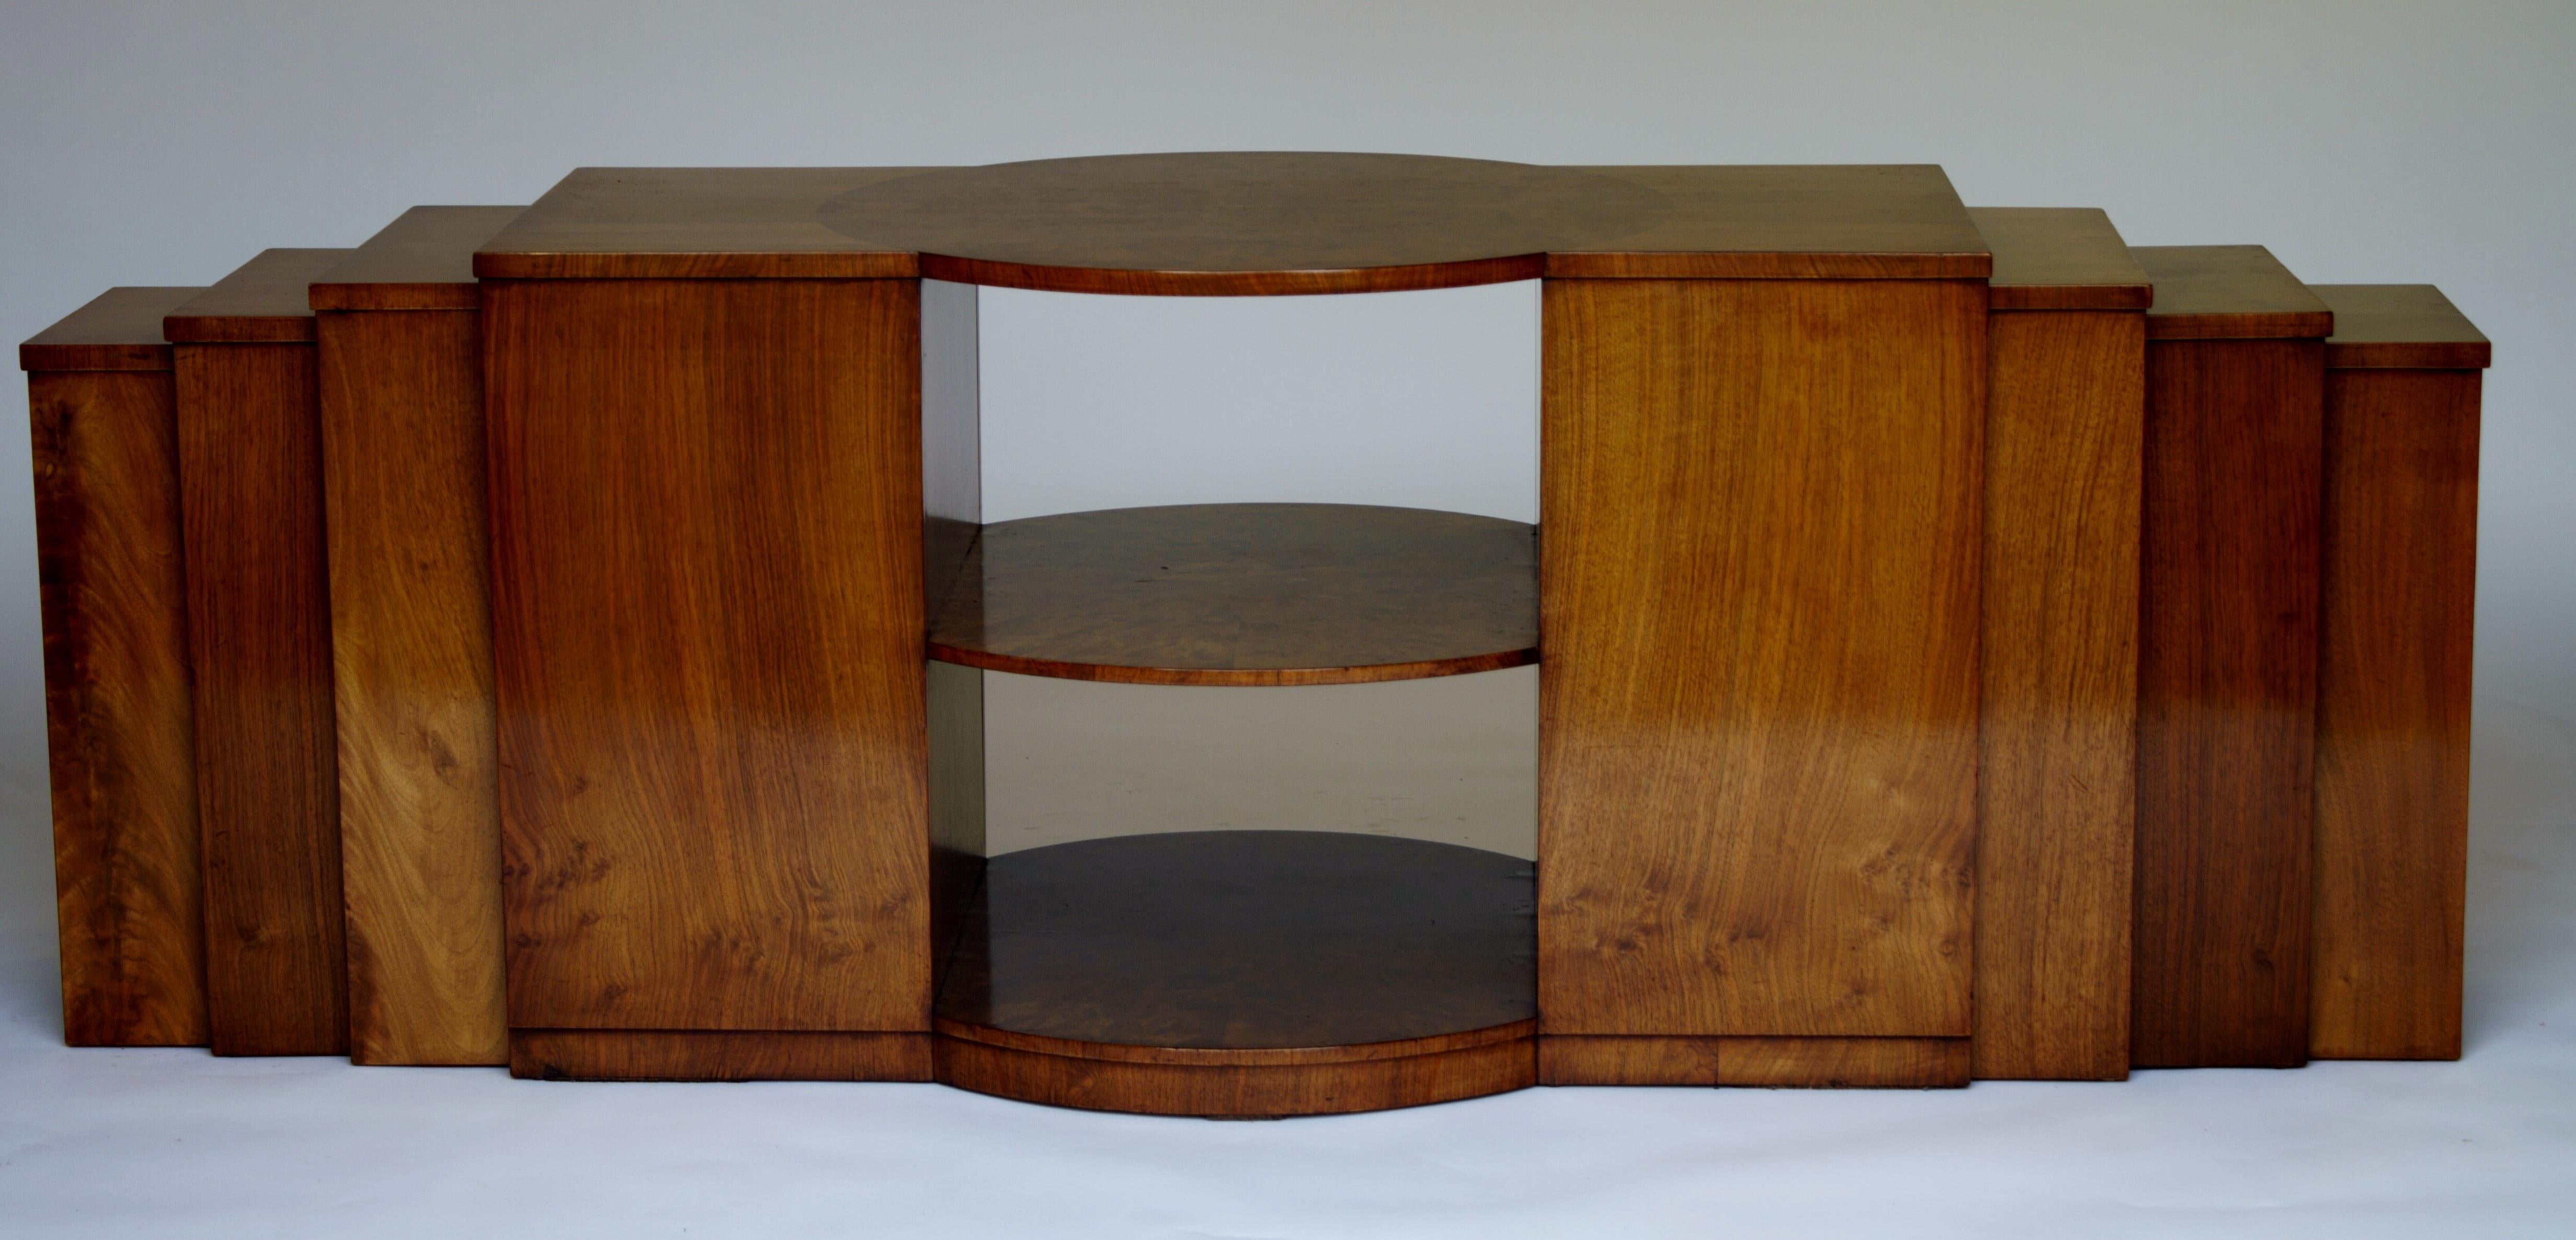 Art Deco Burr  Walnut & Walnut coffee table, with Nest 3 inset tables each side,circa 1920s
Circular 3 tier centre section with burr walnut veneer on tops, 
Attach each side walnut square open compartments, 
each with inset nest 3 walnut